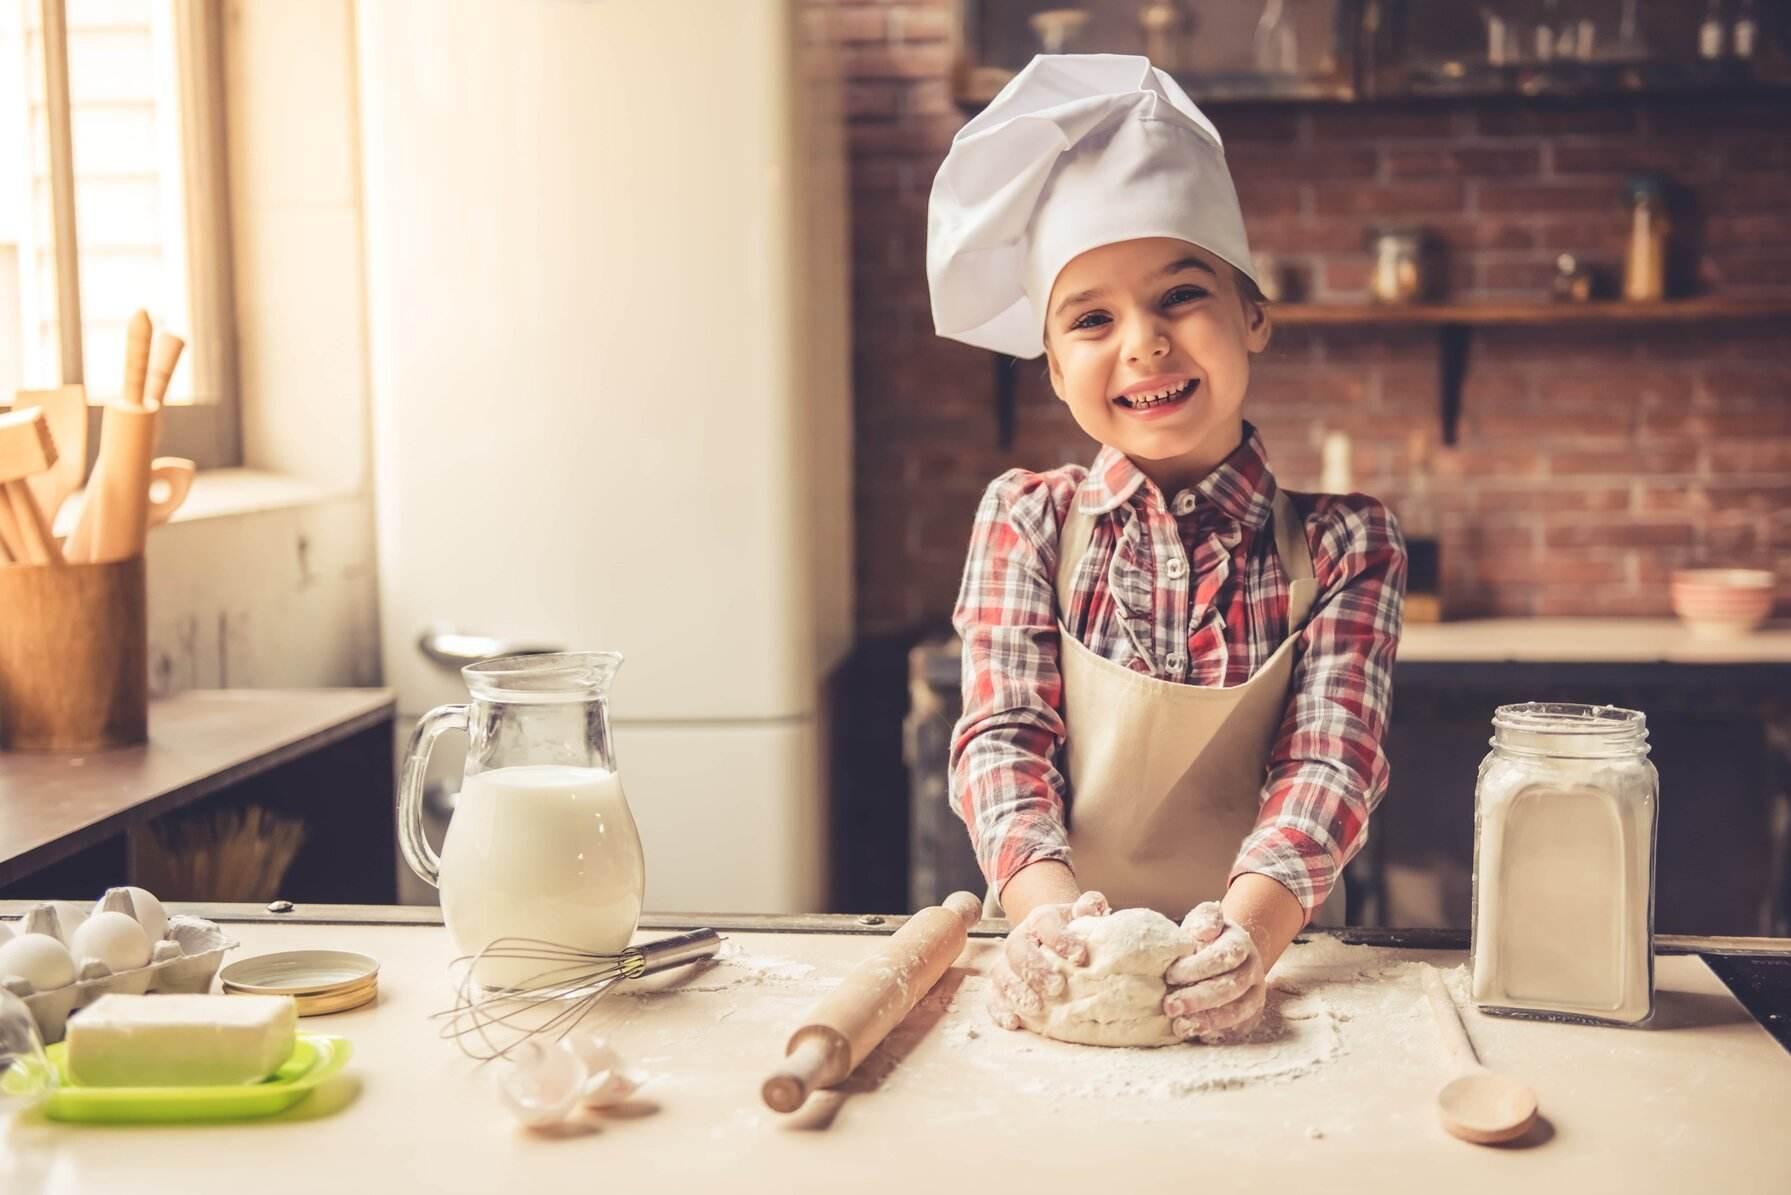 Child in chef hat smiling, with dough and baking utensils